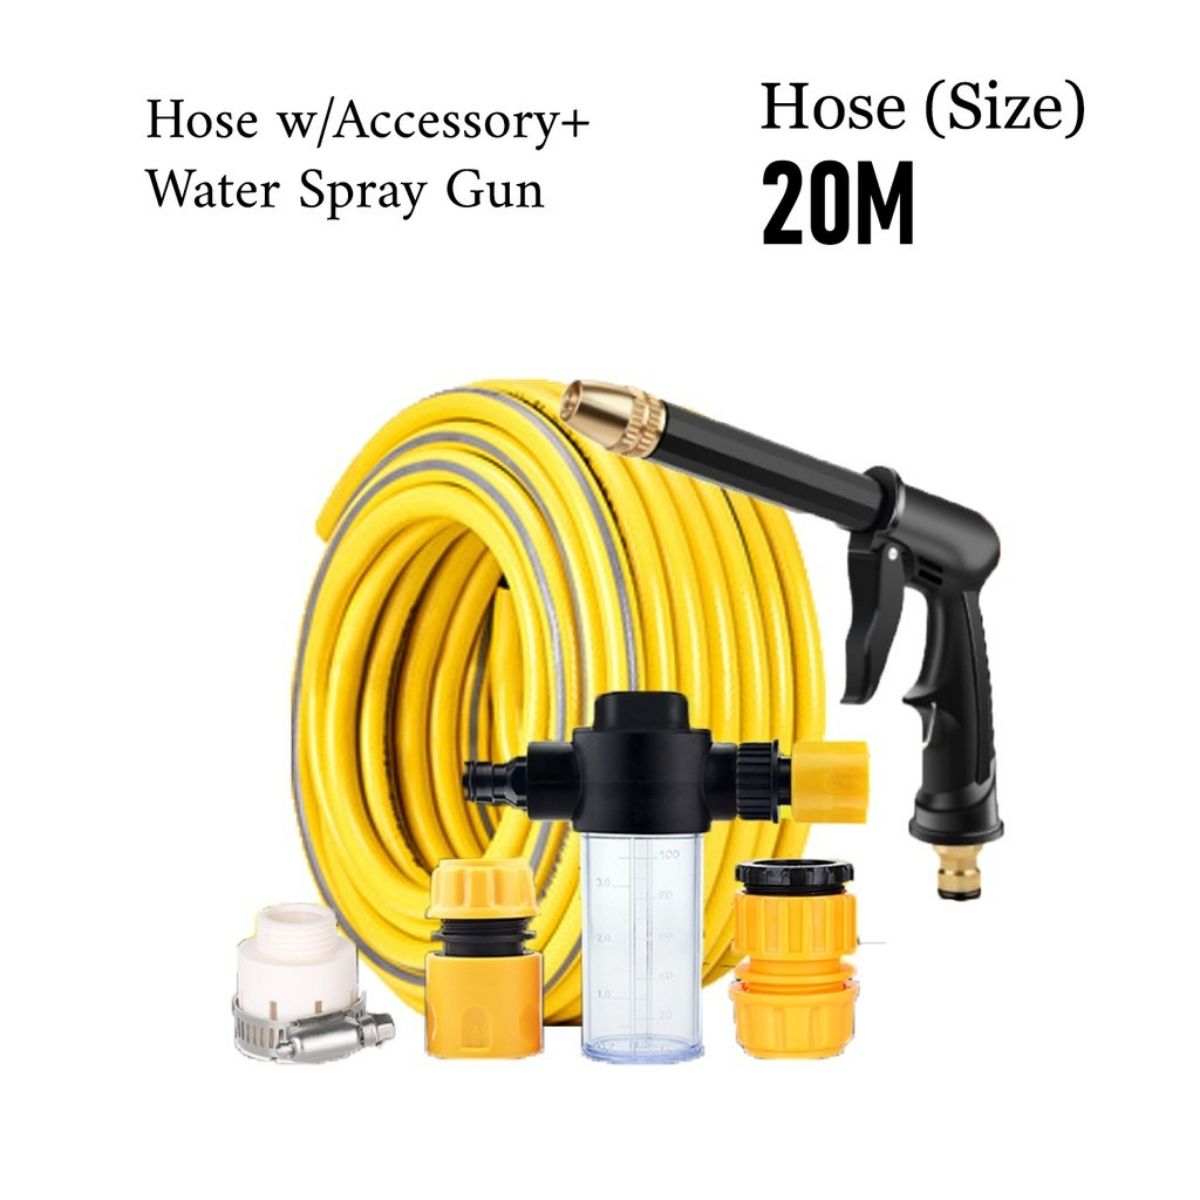 HS369 10M / 15M / 20M PVC GARDEN HOSE WITH ACCESSORY High Pressure Water Spray Car Wash Explosion-proof Garden Hose